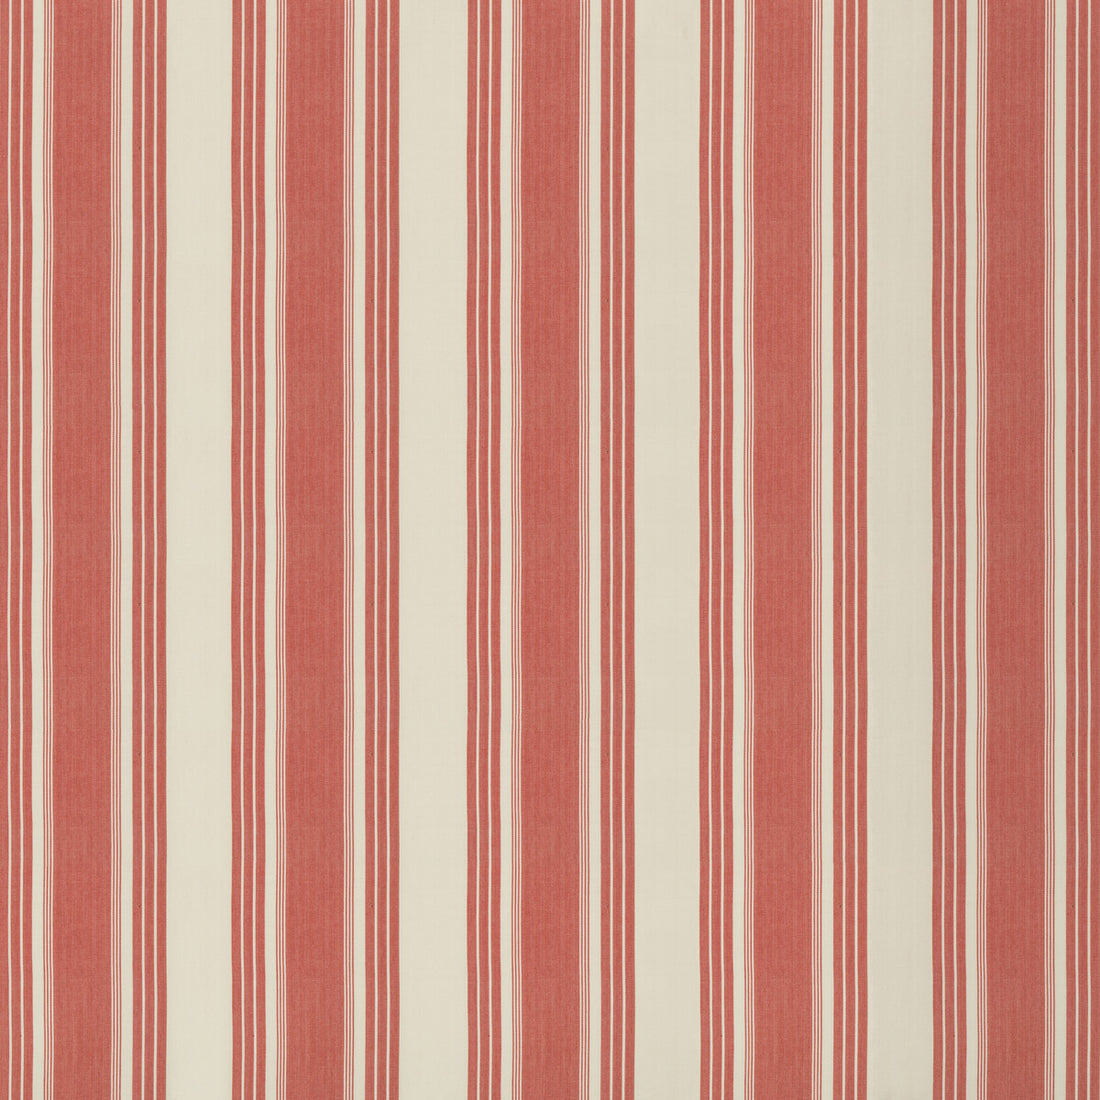 Colmar Stripe fabric in rose color - pattern 8019110.197.0 - by Brunschwig &amp; Fils in the Folio Francais collection